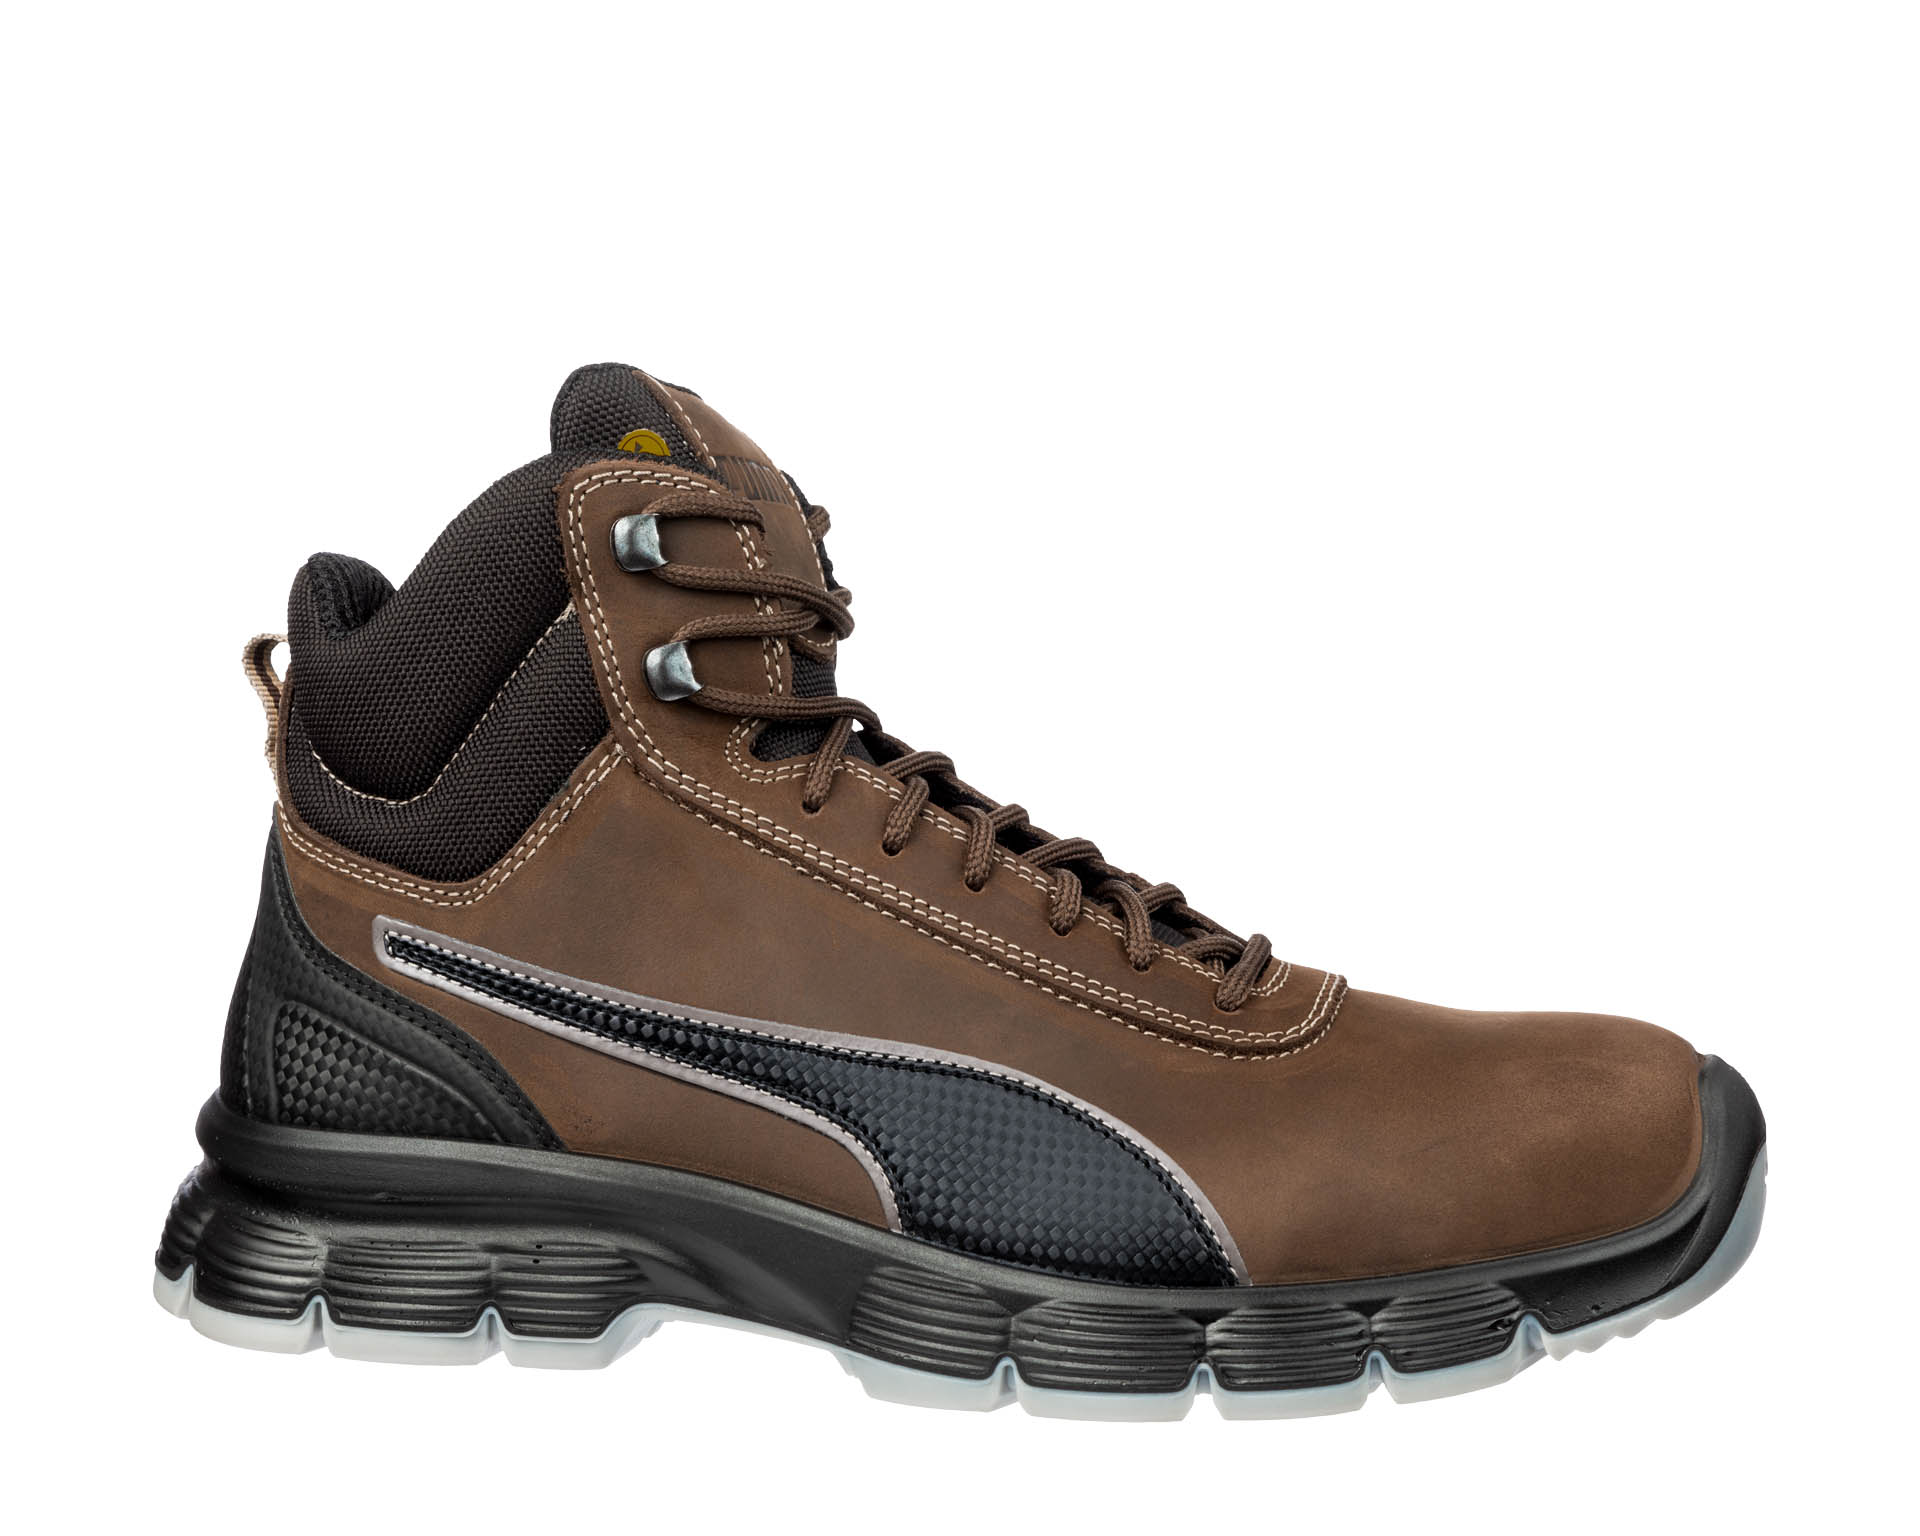 PUMA SAFETY safety shoes S3 ESD SRC CONDOR BROWN MID | Puma Safety English